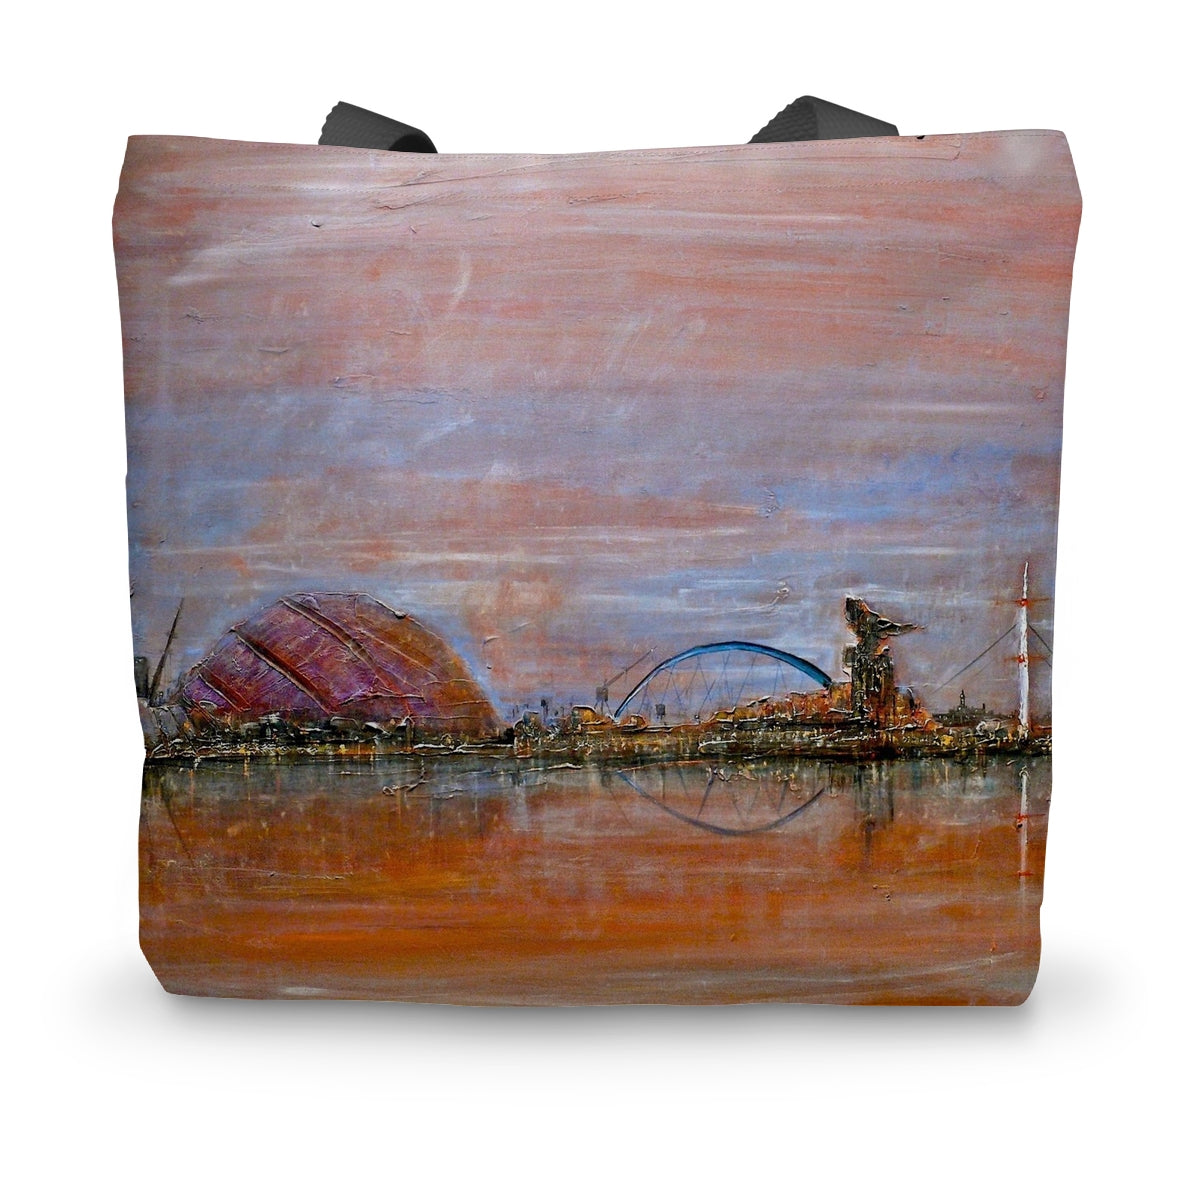 Glasgow Harbour Art Gifts Canvas Tote Bag-Bags-Edinburgh & Glasgow Art Gallery-14"x18.5"-Paintings, Prints, Homeware, Art Gifts From Scotland By Scottish Artist Kevin Hunter